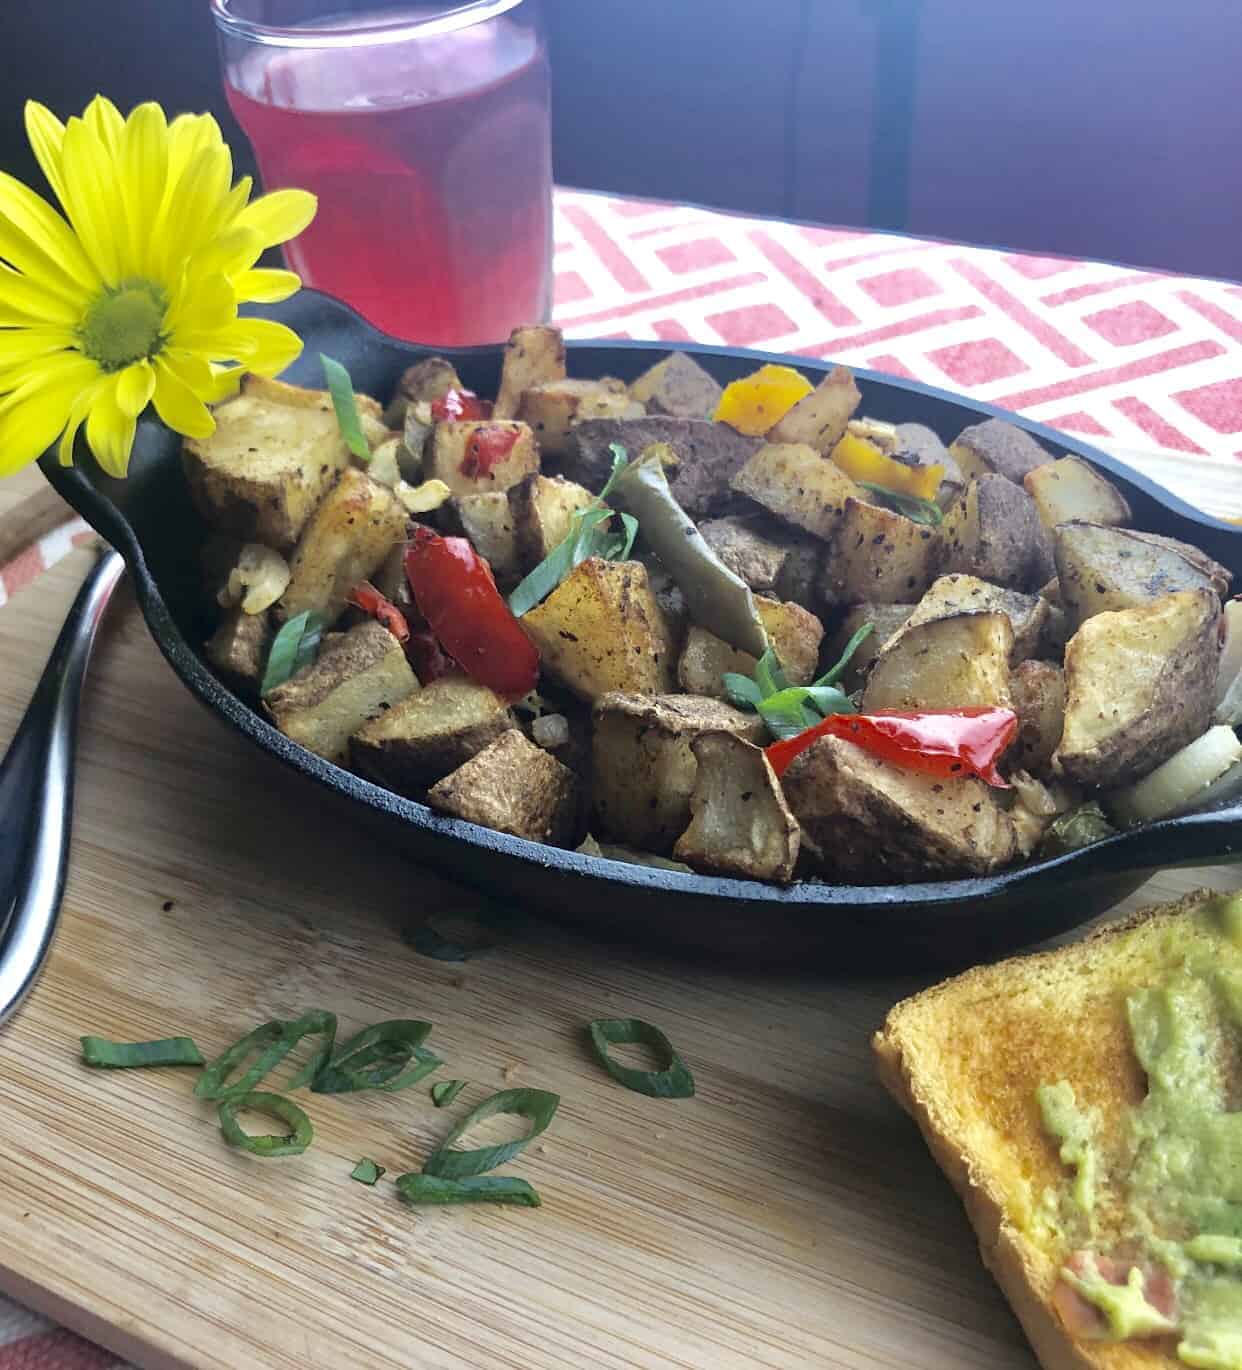 Healthy Home Fried Potatoes in a black casserole dish with cur chives and avocado toast on a wooden cutting board